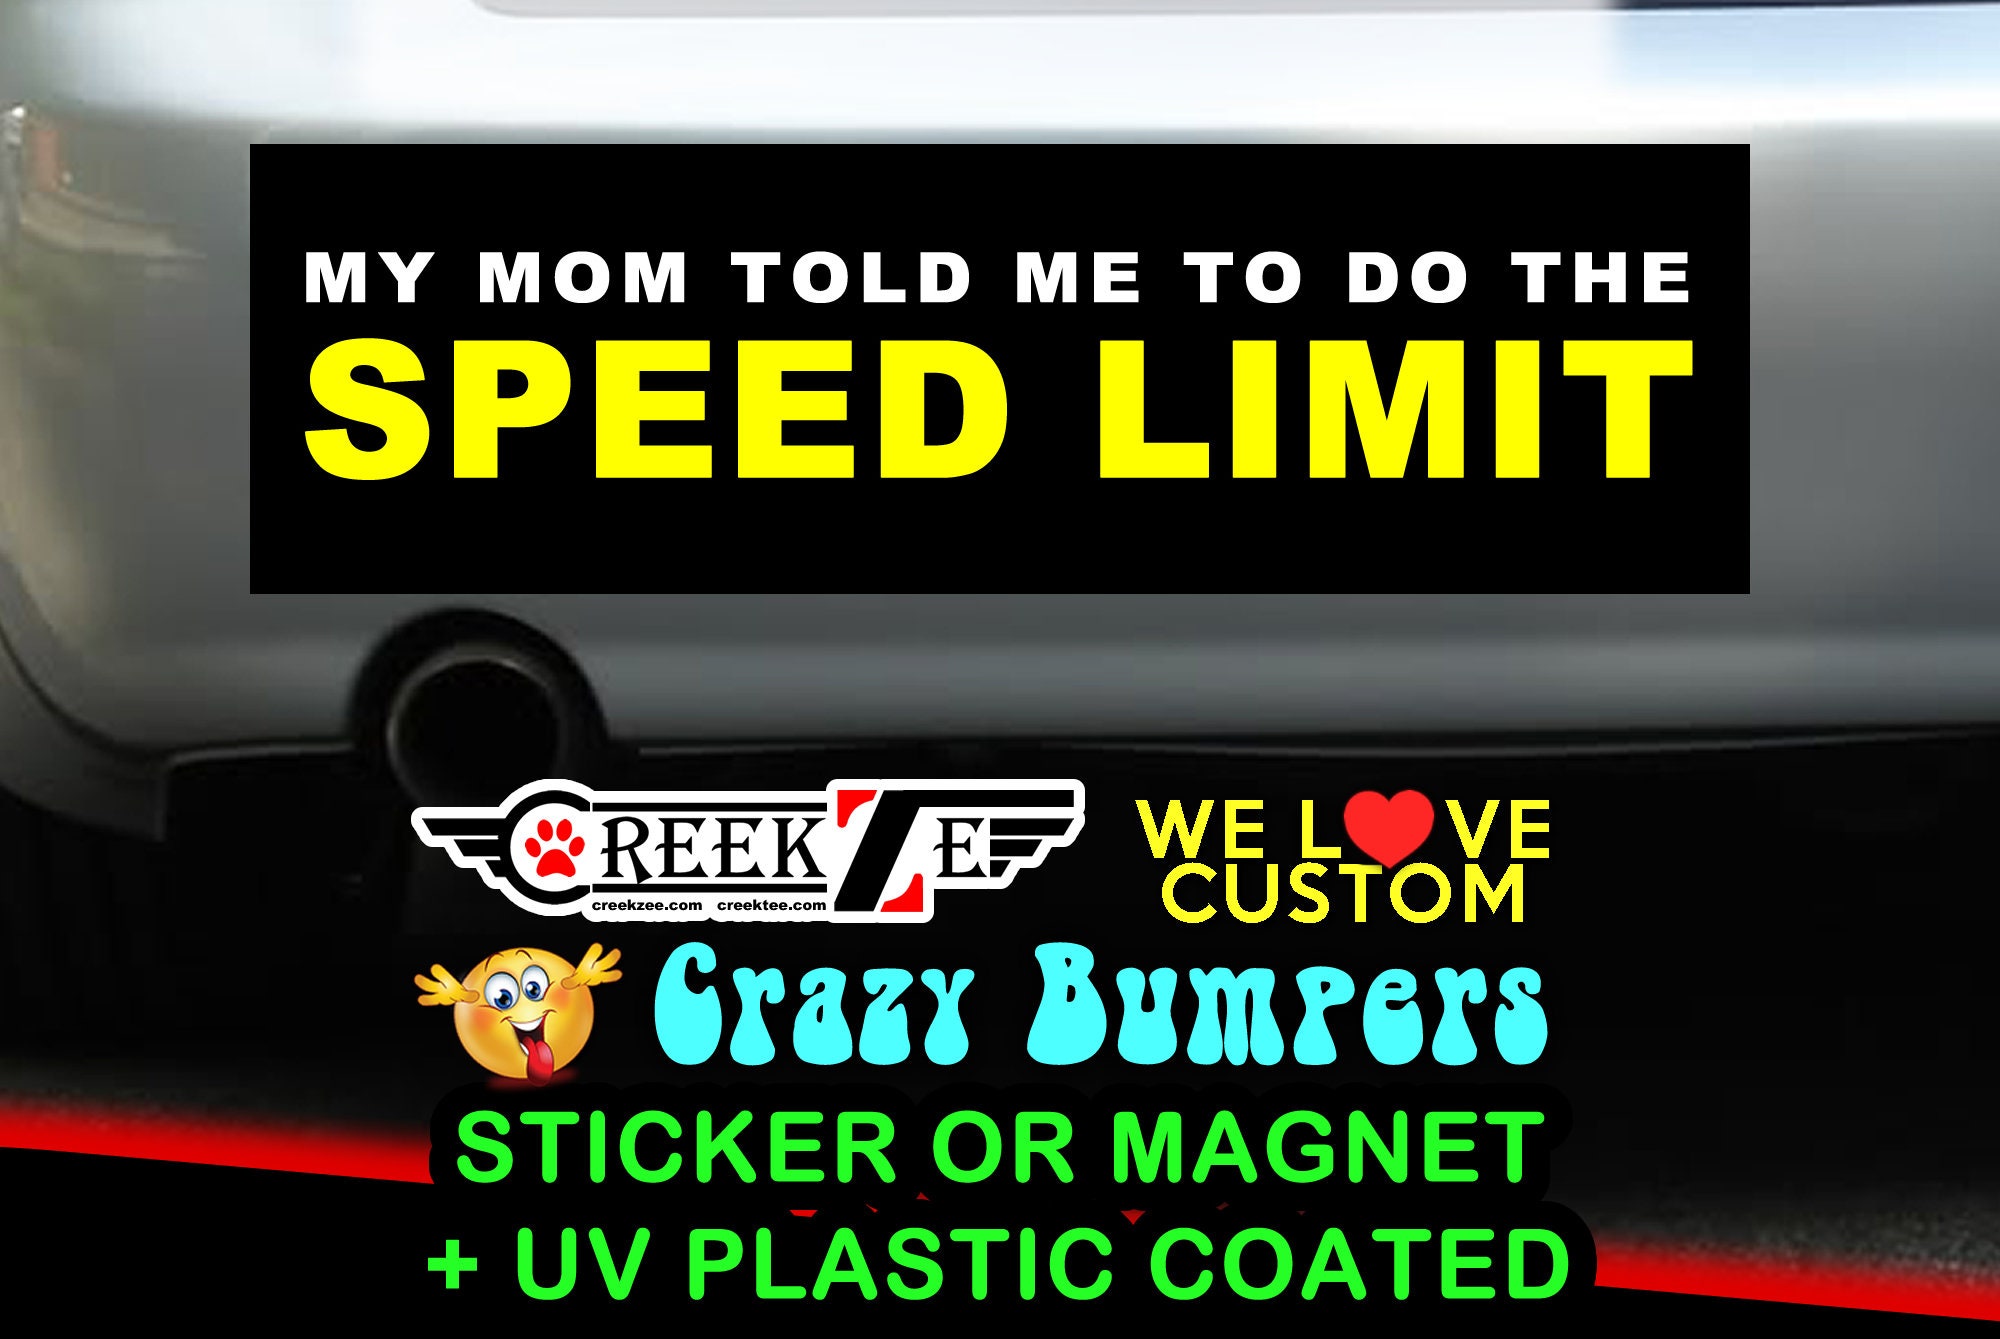 My Mom Told Me To Do The Speed Limit Bumper Sticker or Magnet 4